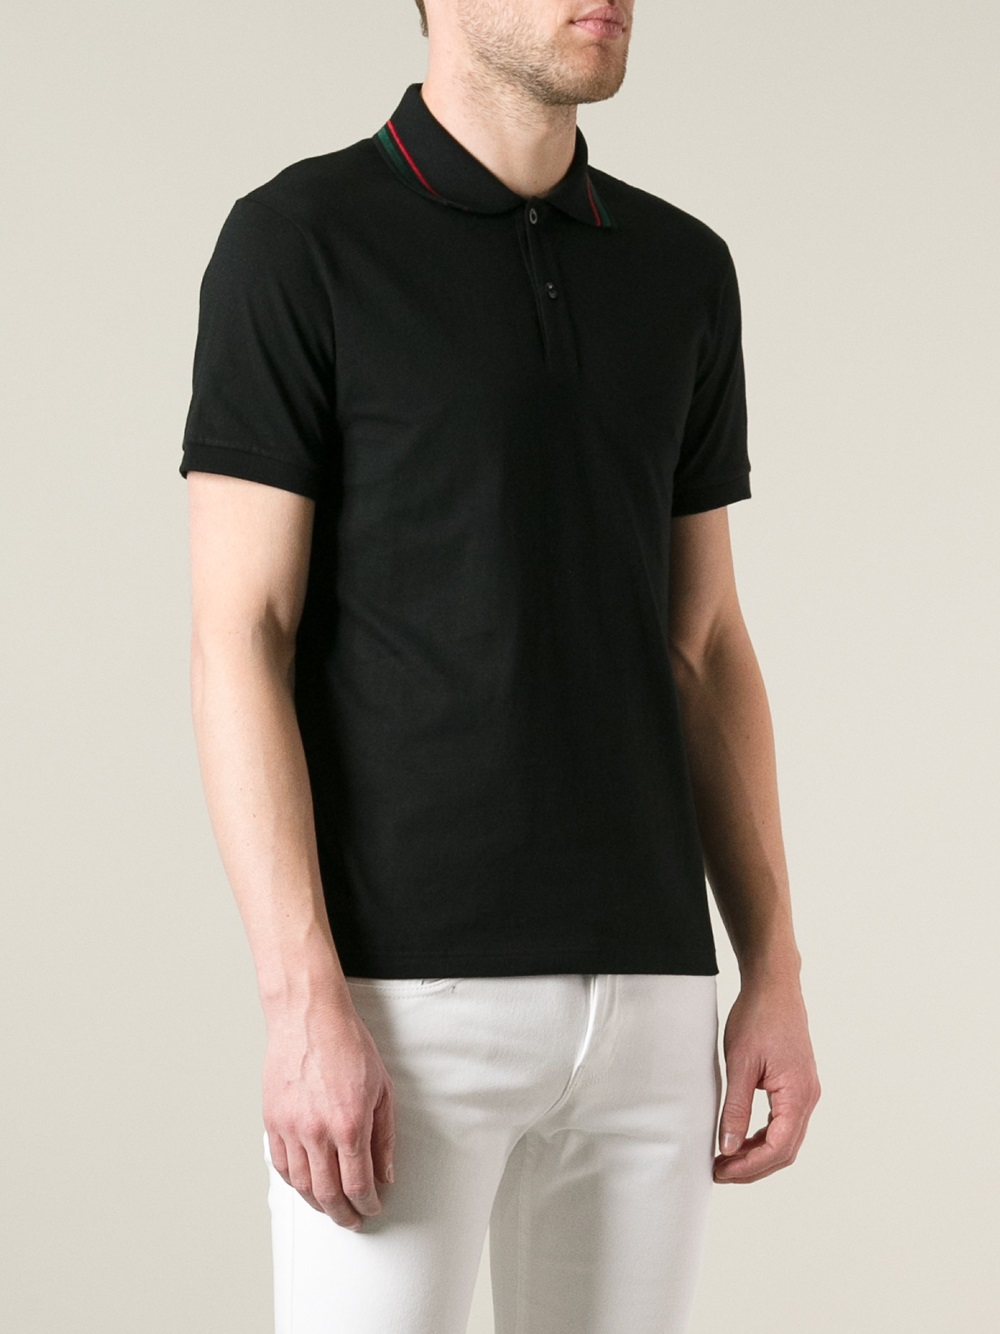 Gucci Classic Polo Shirt in Black for Men - Lyst